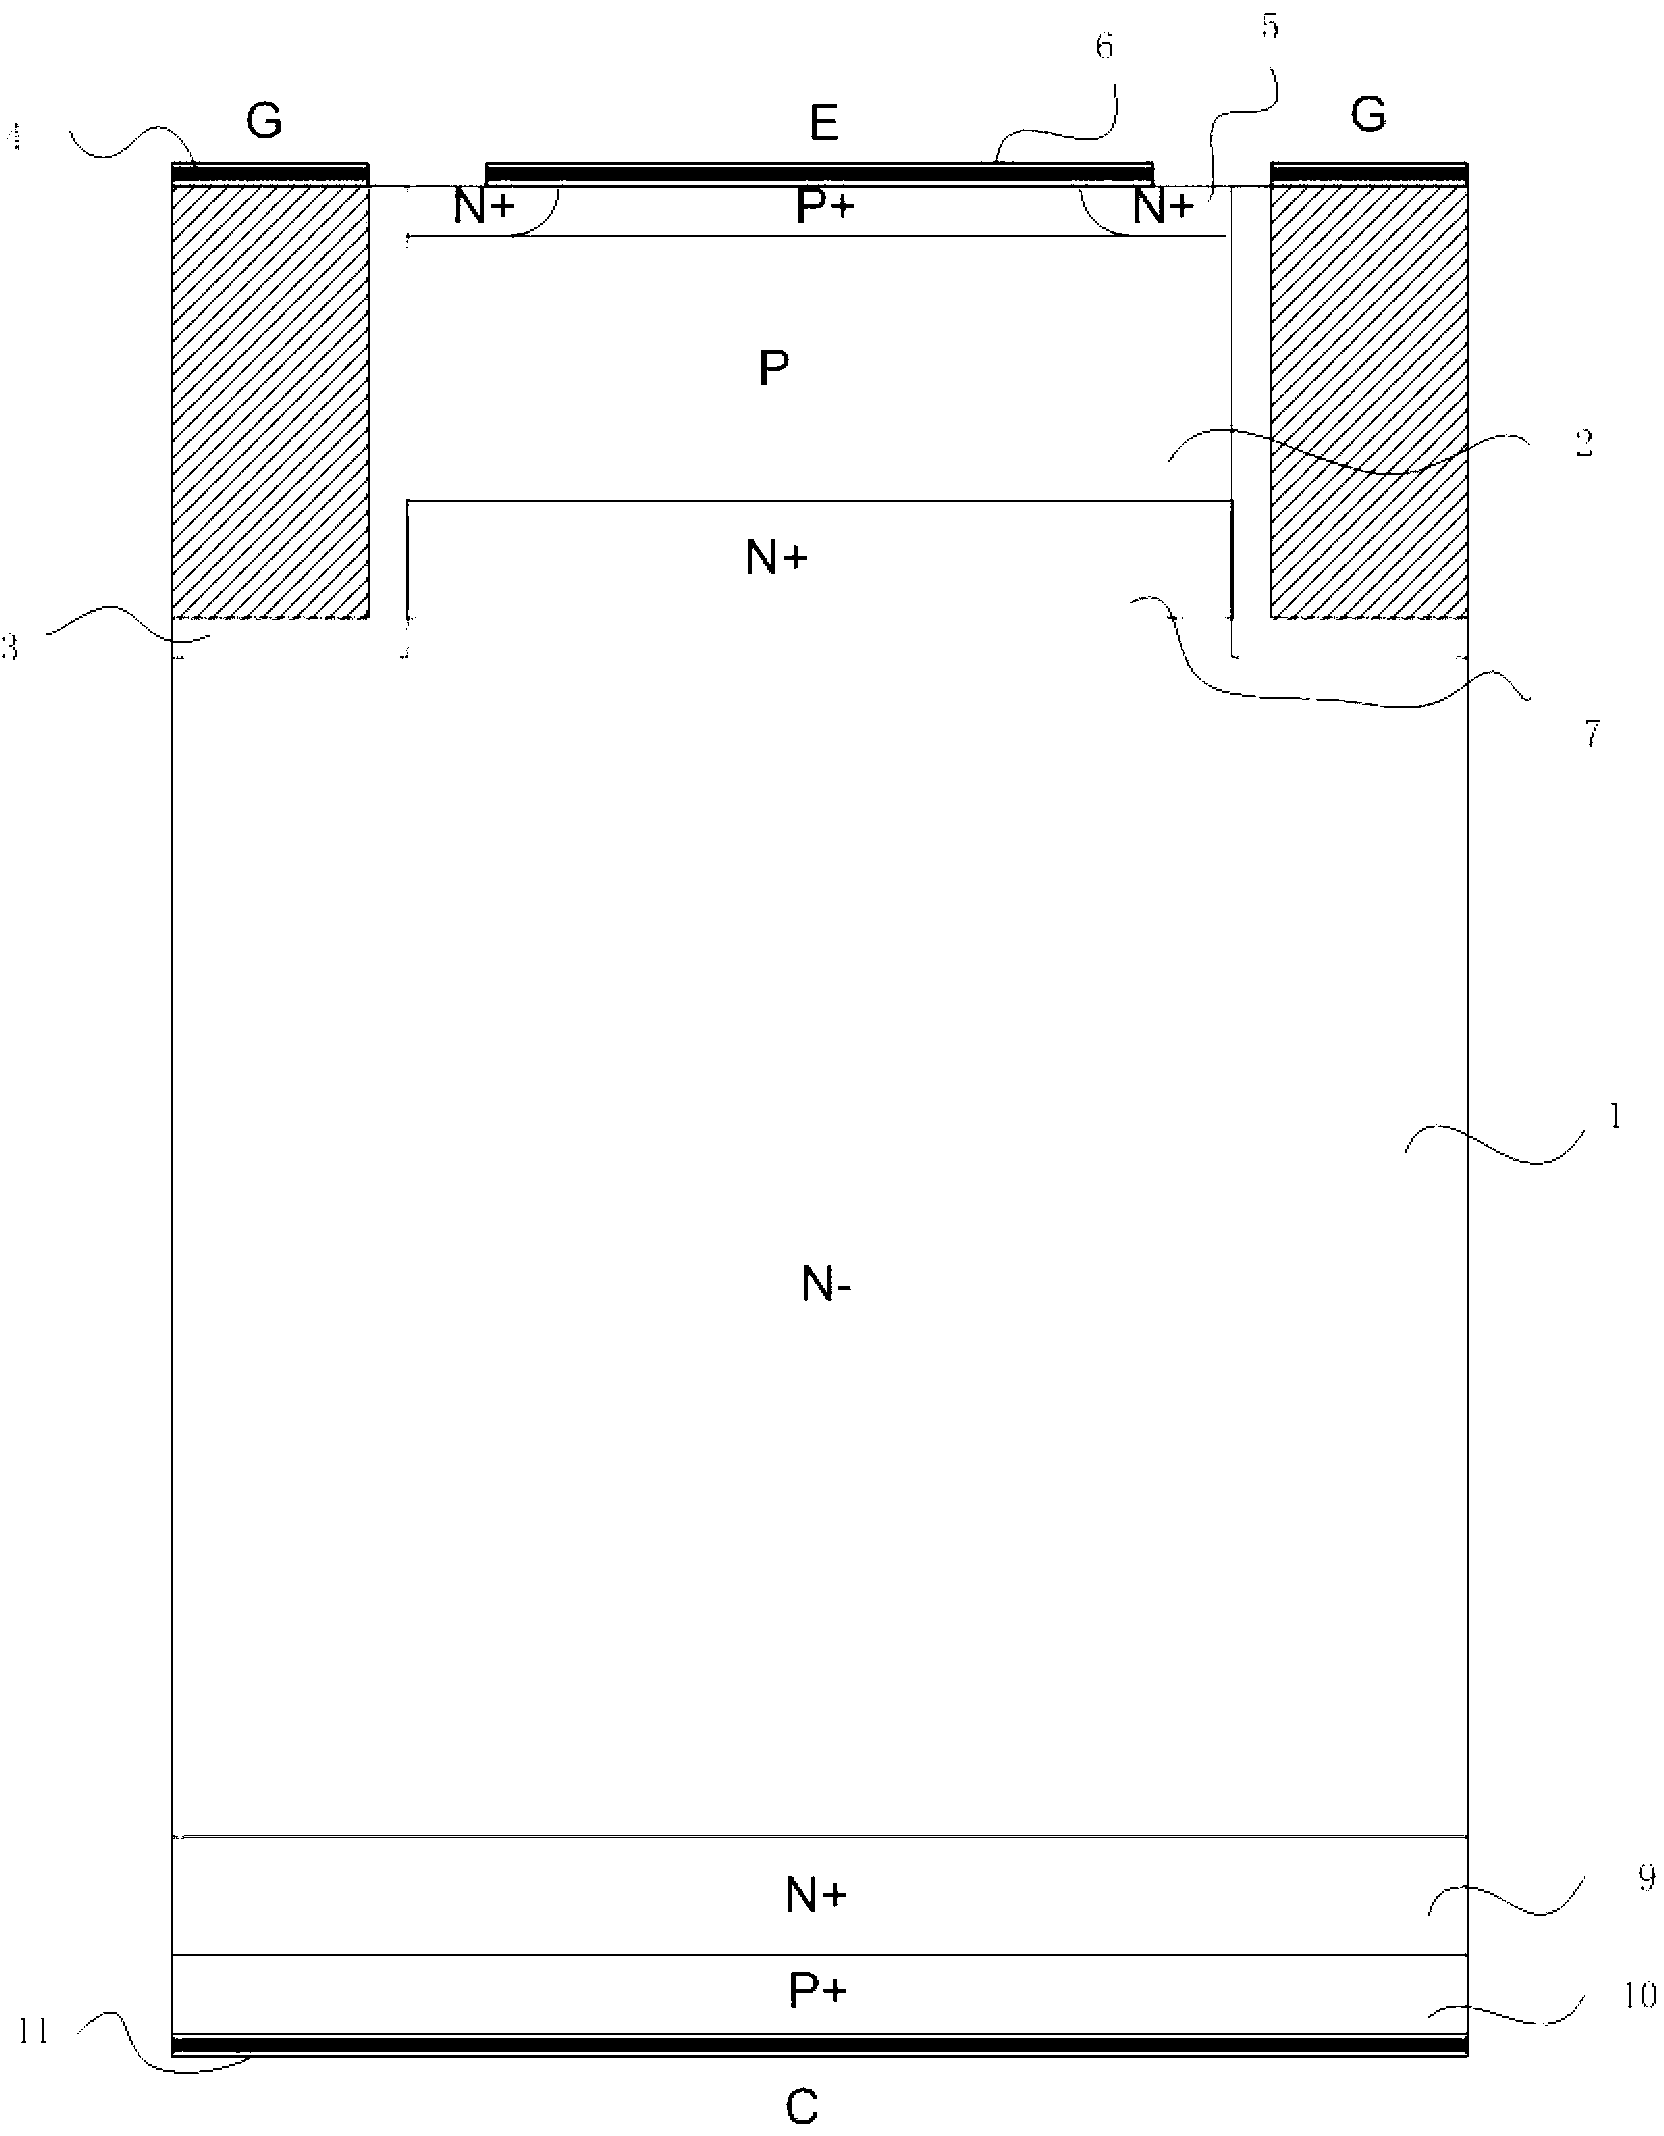 Carrier-stored trench gate bipolar transistor